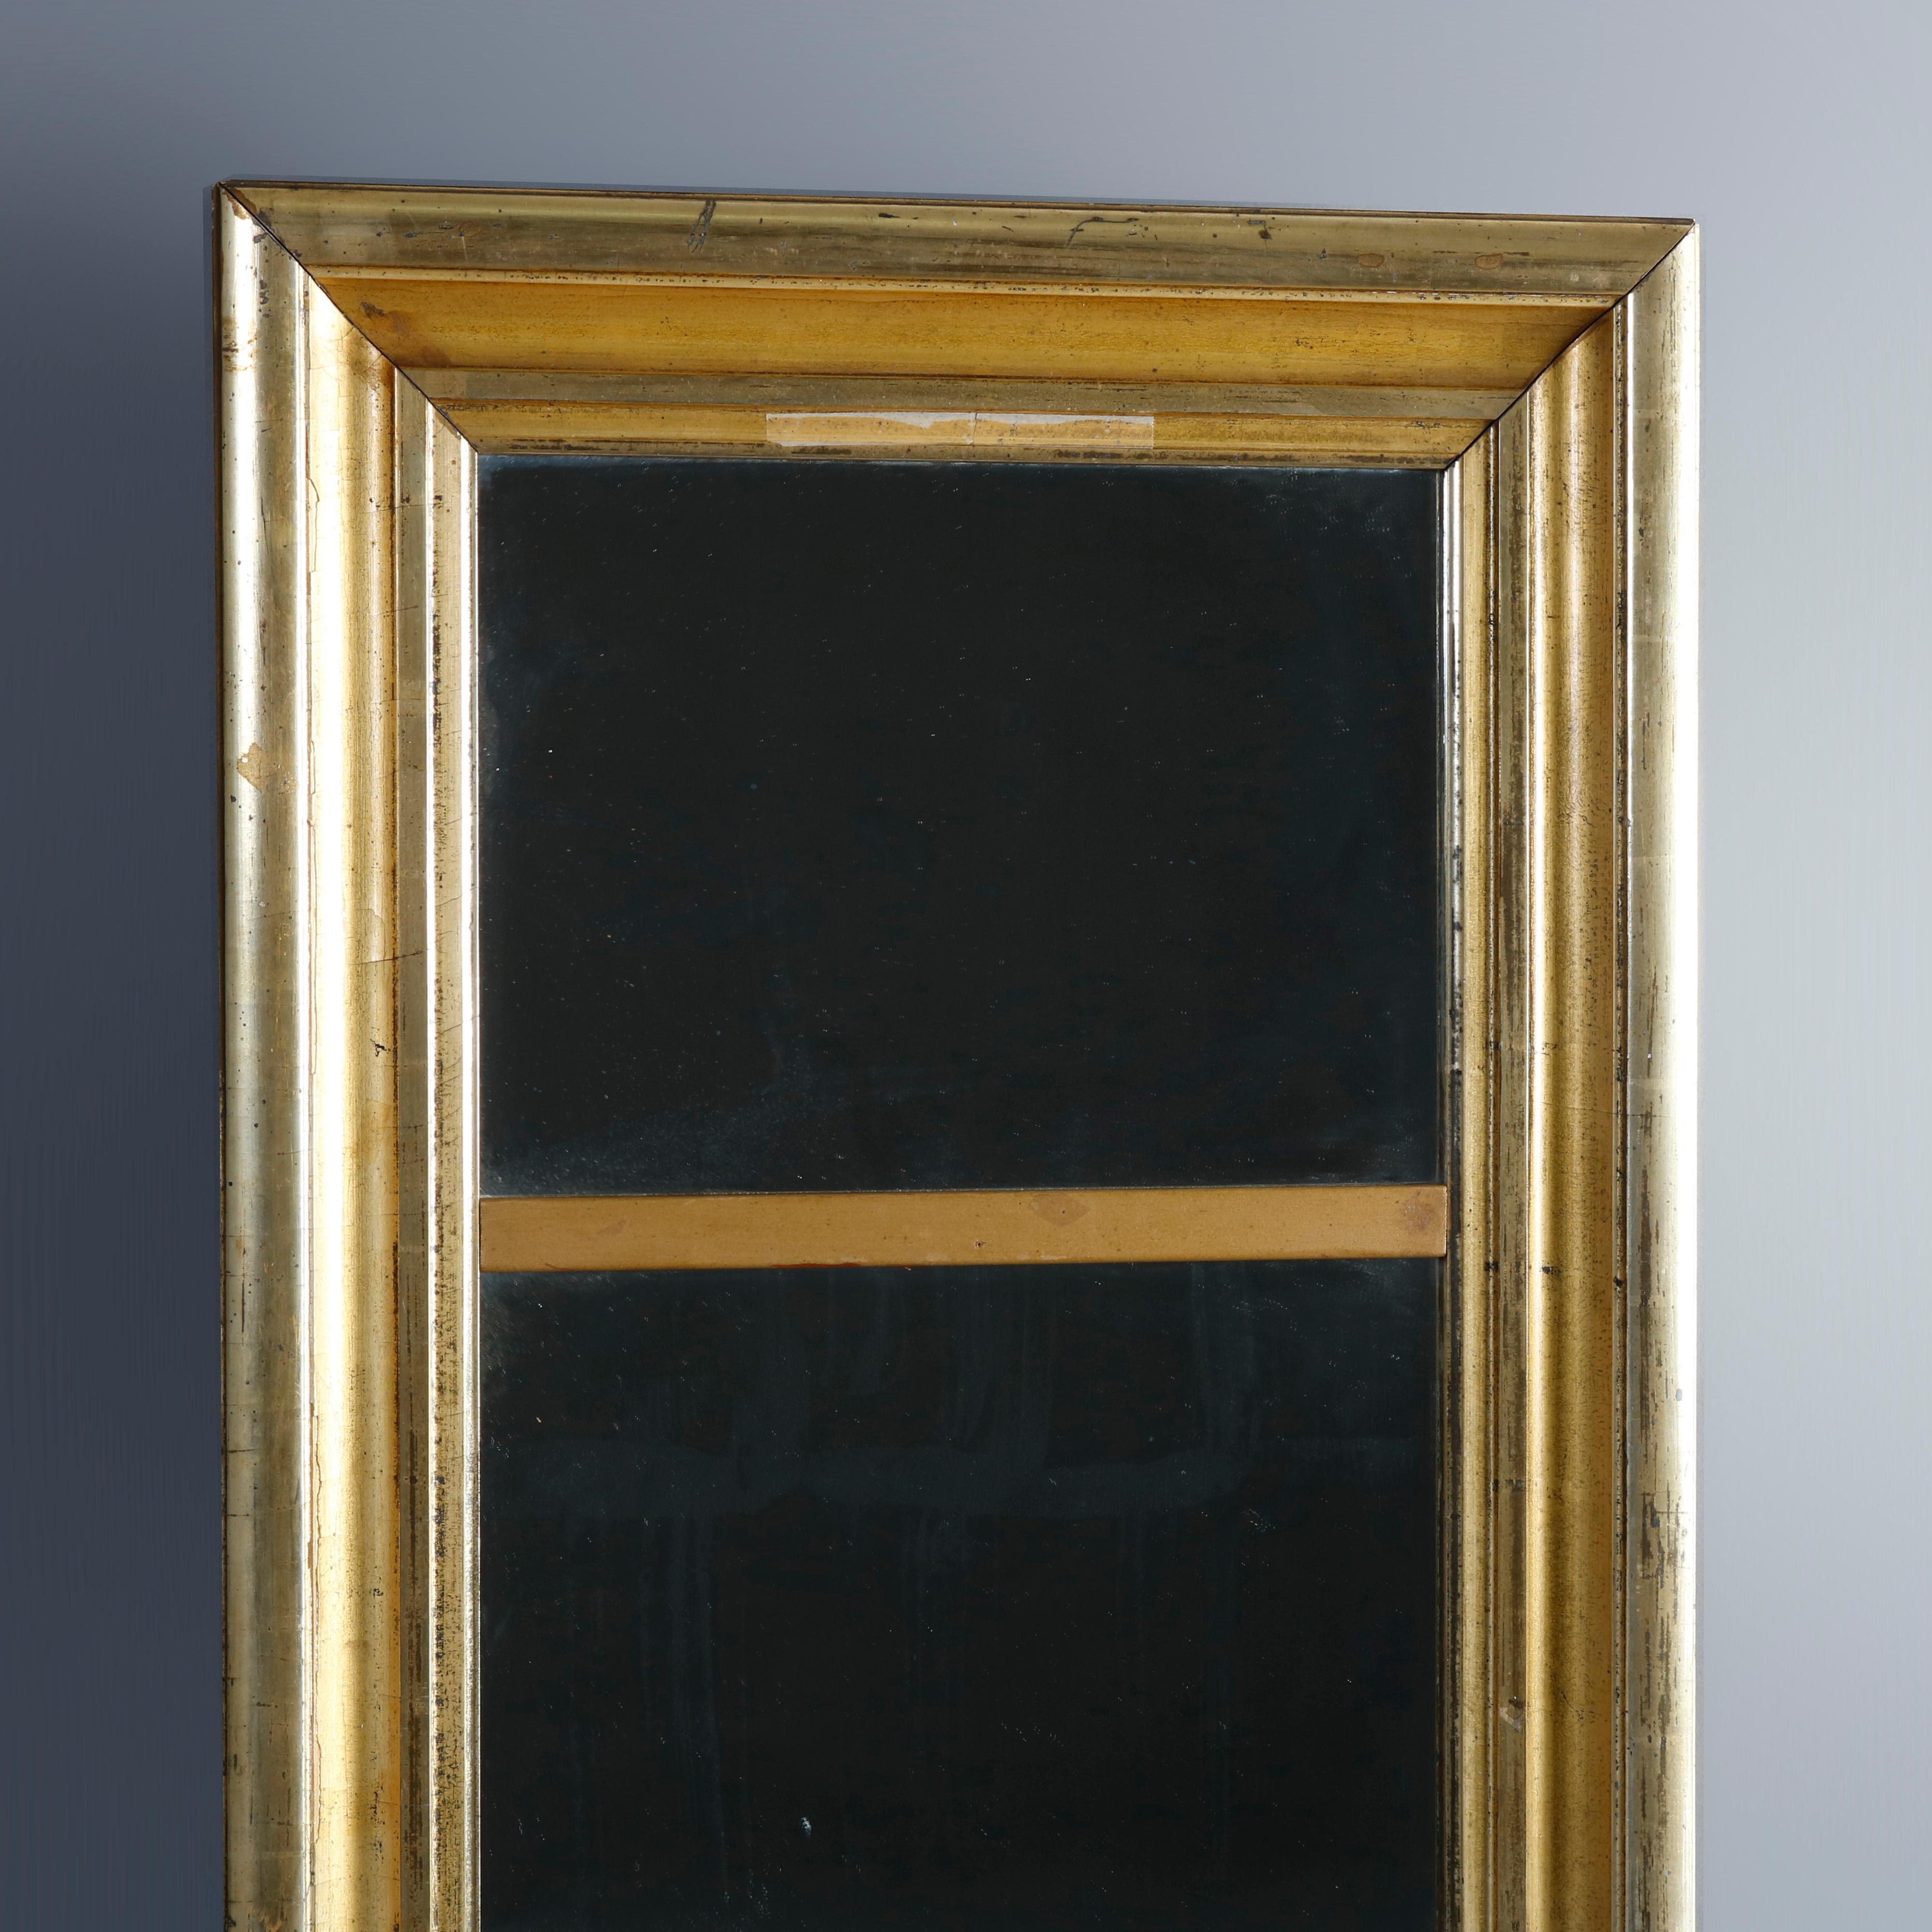 An antique Trumeau wall mirror offers lemon giltwood frame housing upper and lower mirror plates, circa 1840

Measures: 45